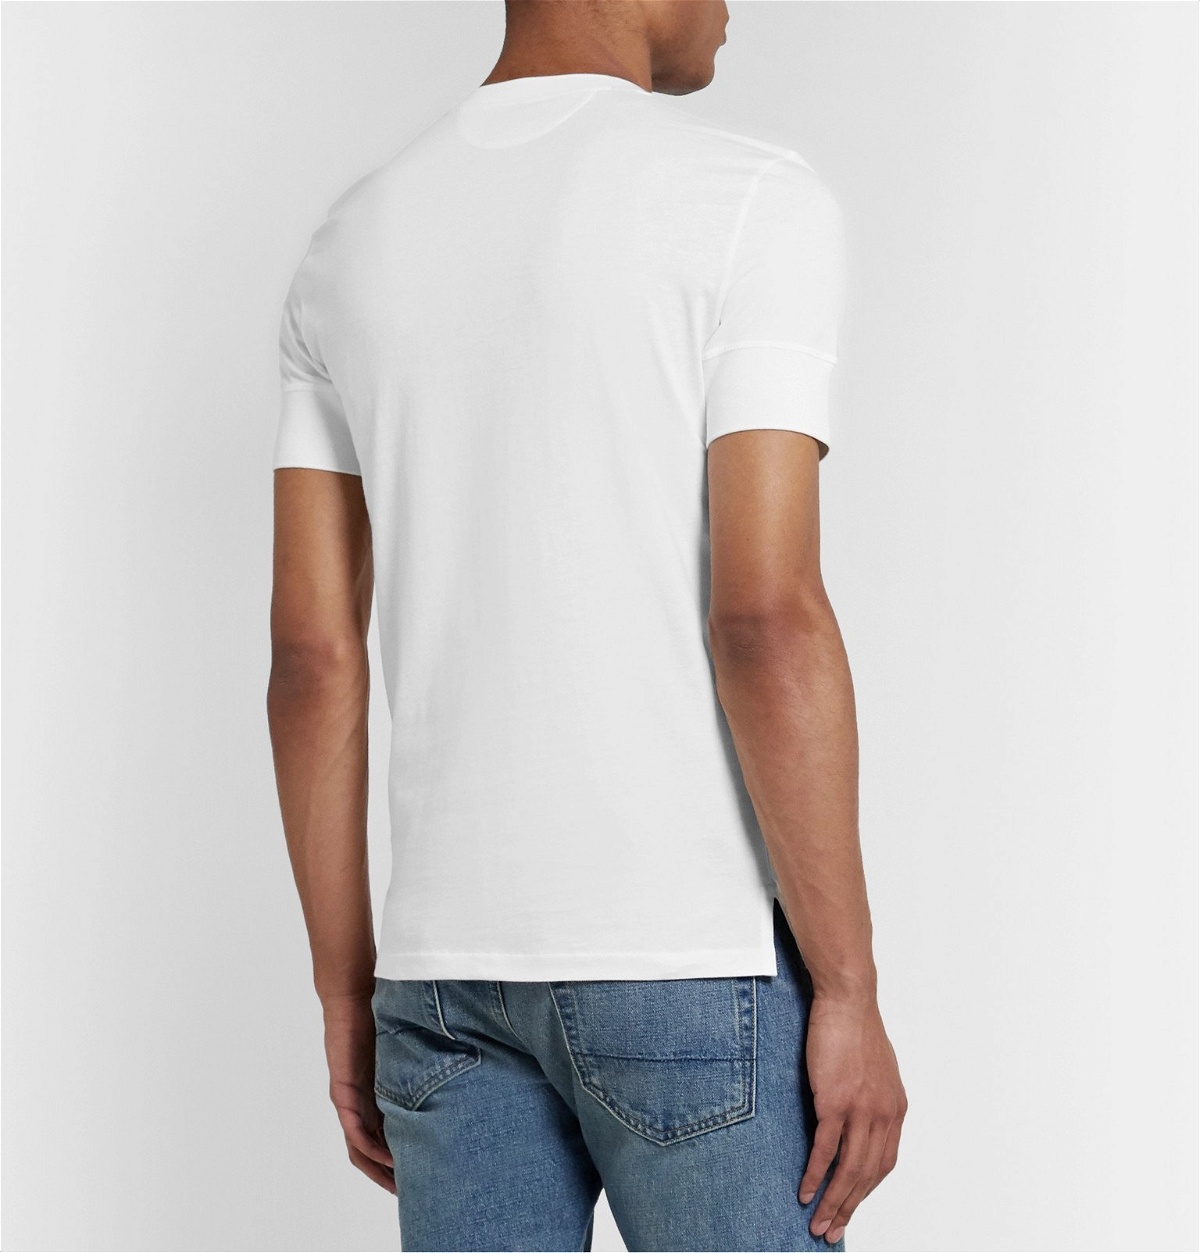 TOM FORD - Slim-Fit Cotton-Jersey Henley T-Shirt - White TOM FORD